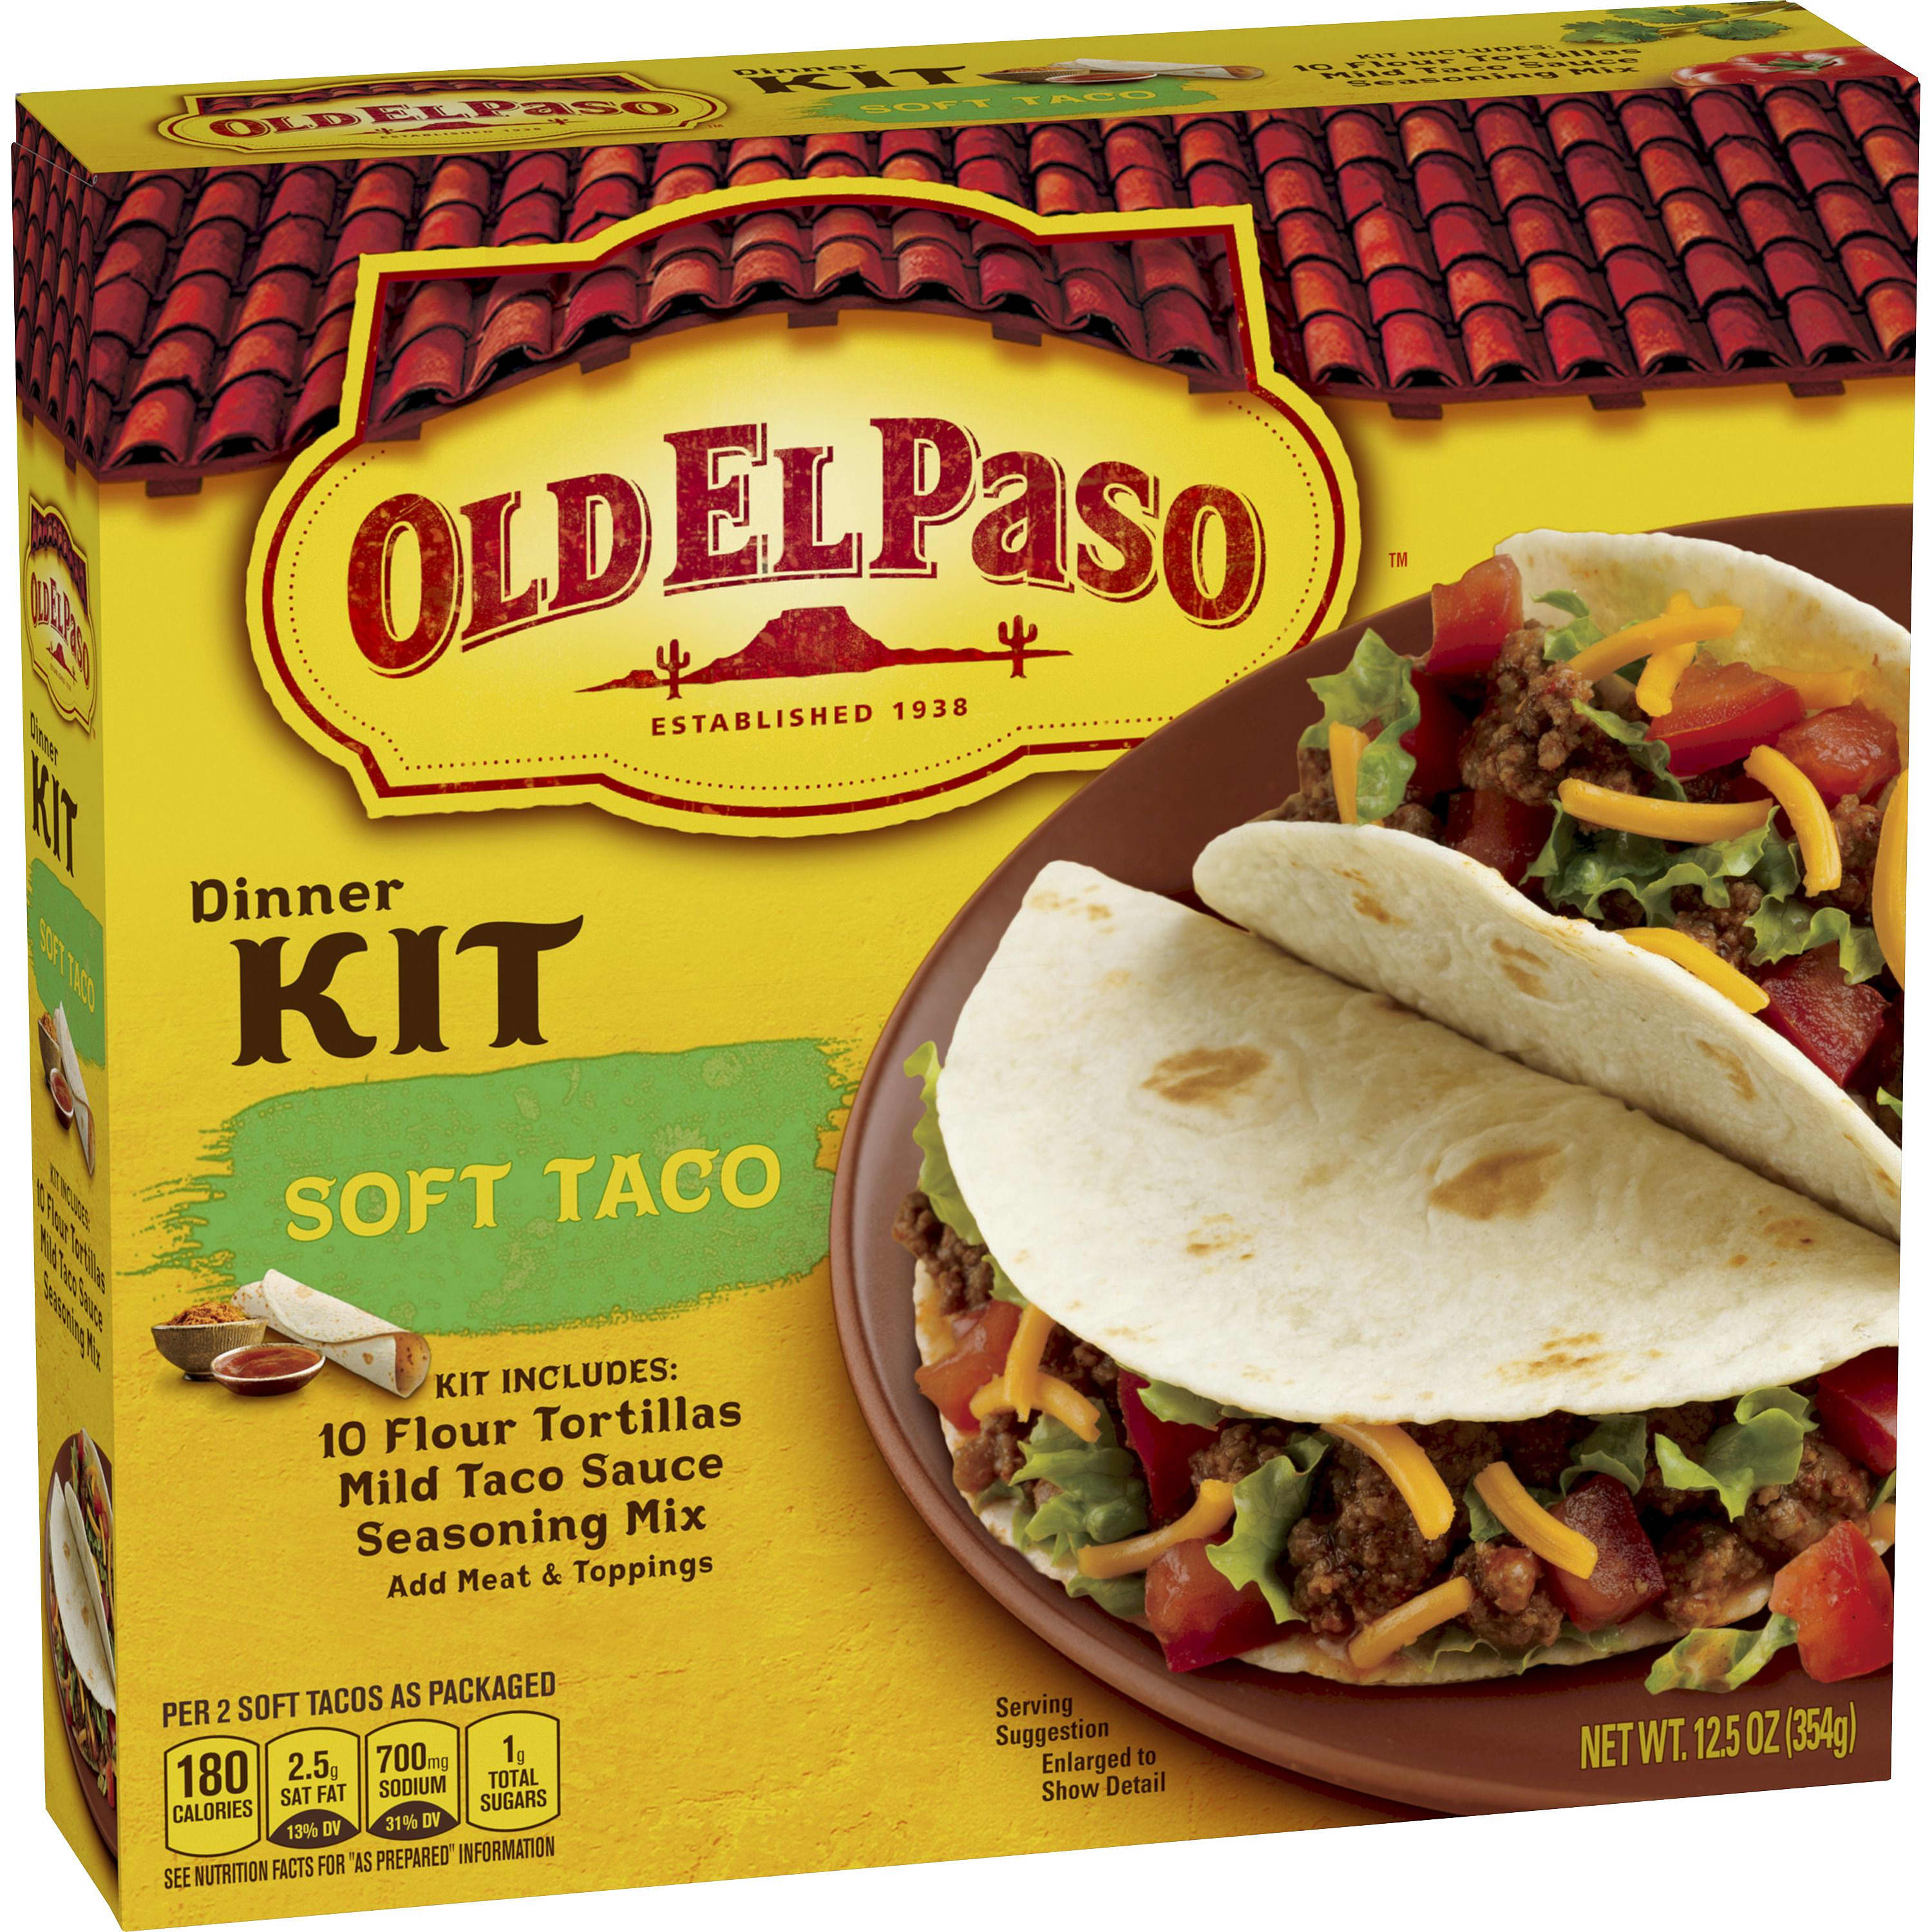 Soft Taco Dinner Kit Products Old El Paso 4115